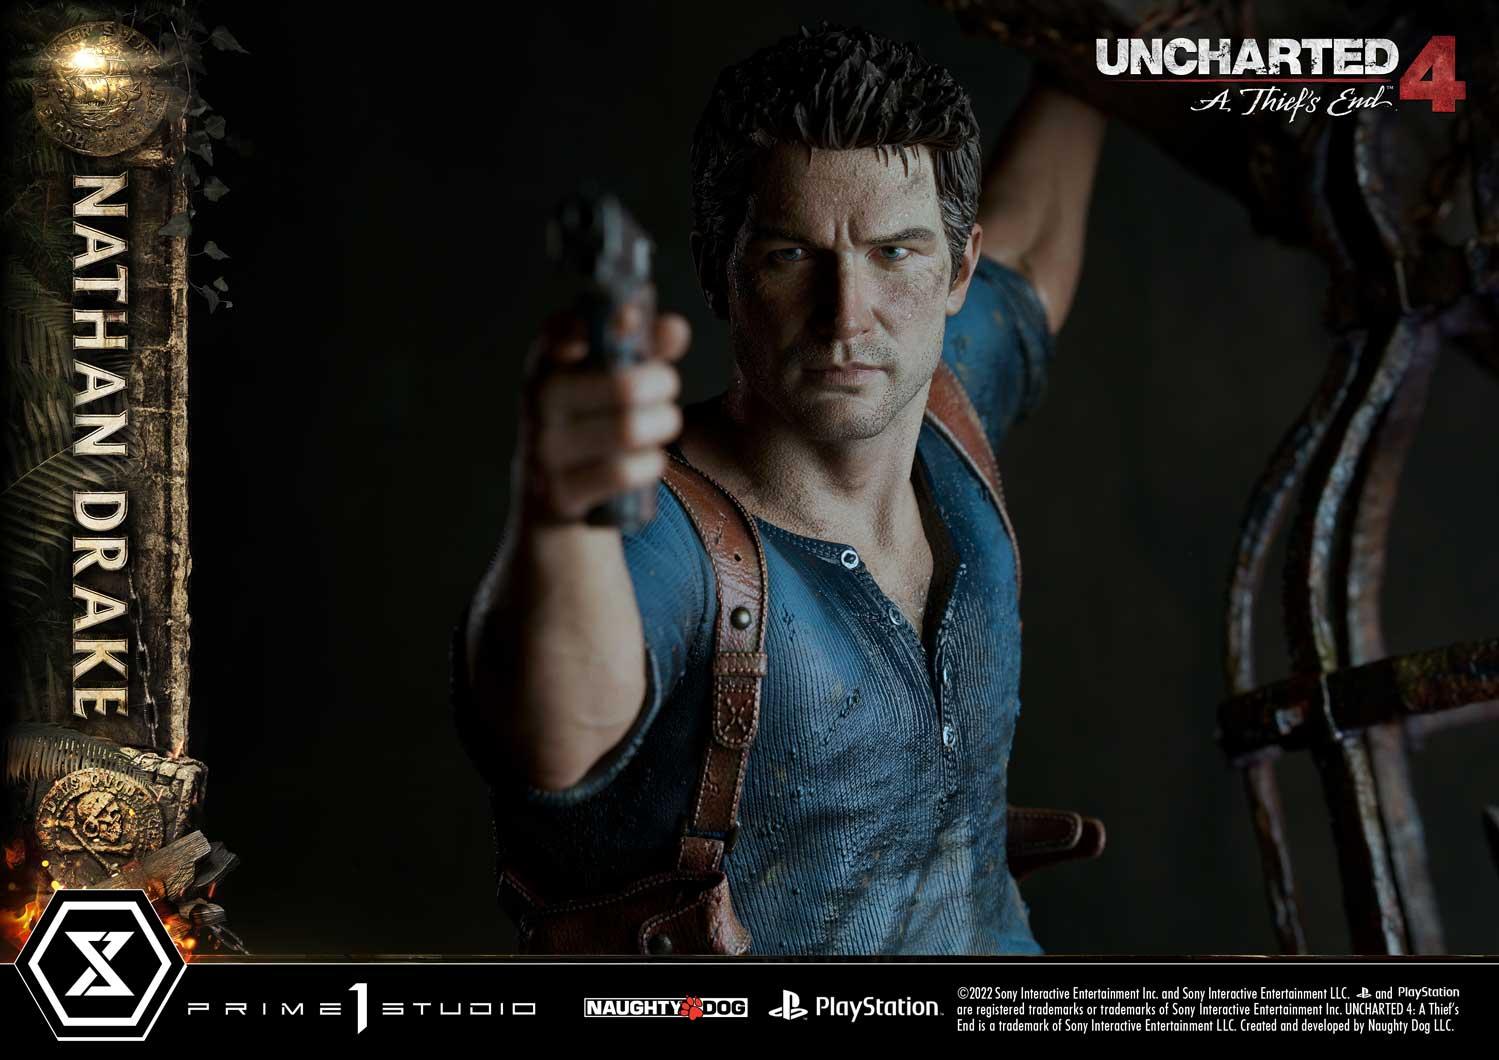 Uncharted 4: A Thief's End Nathan Drake DX Statue by Prime 1 Studio